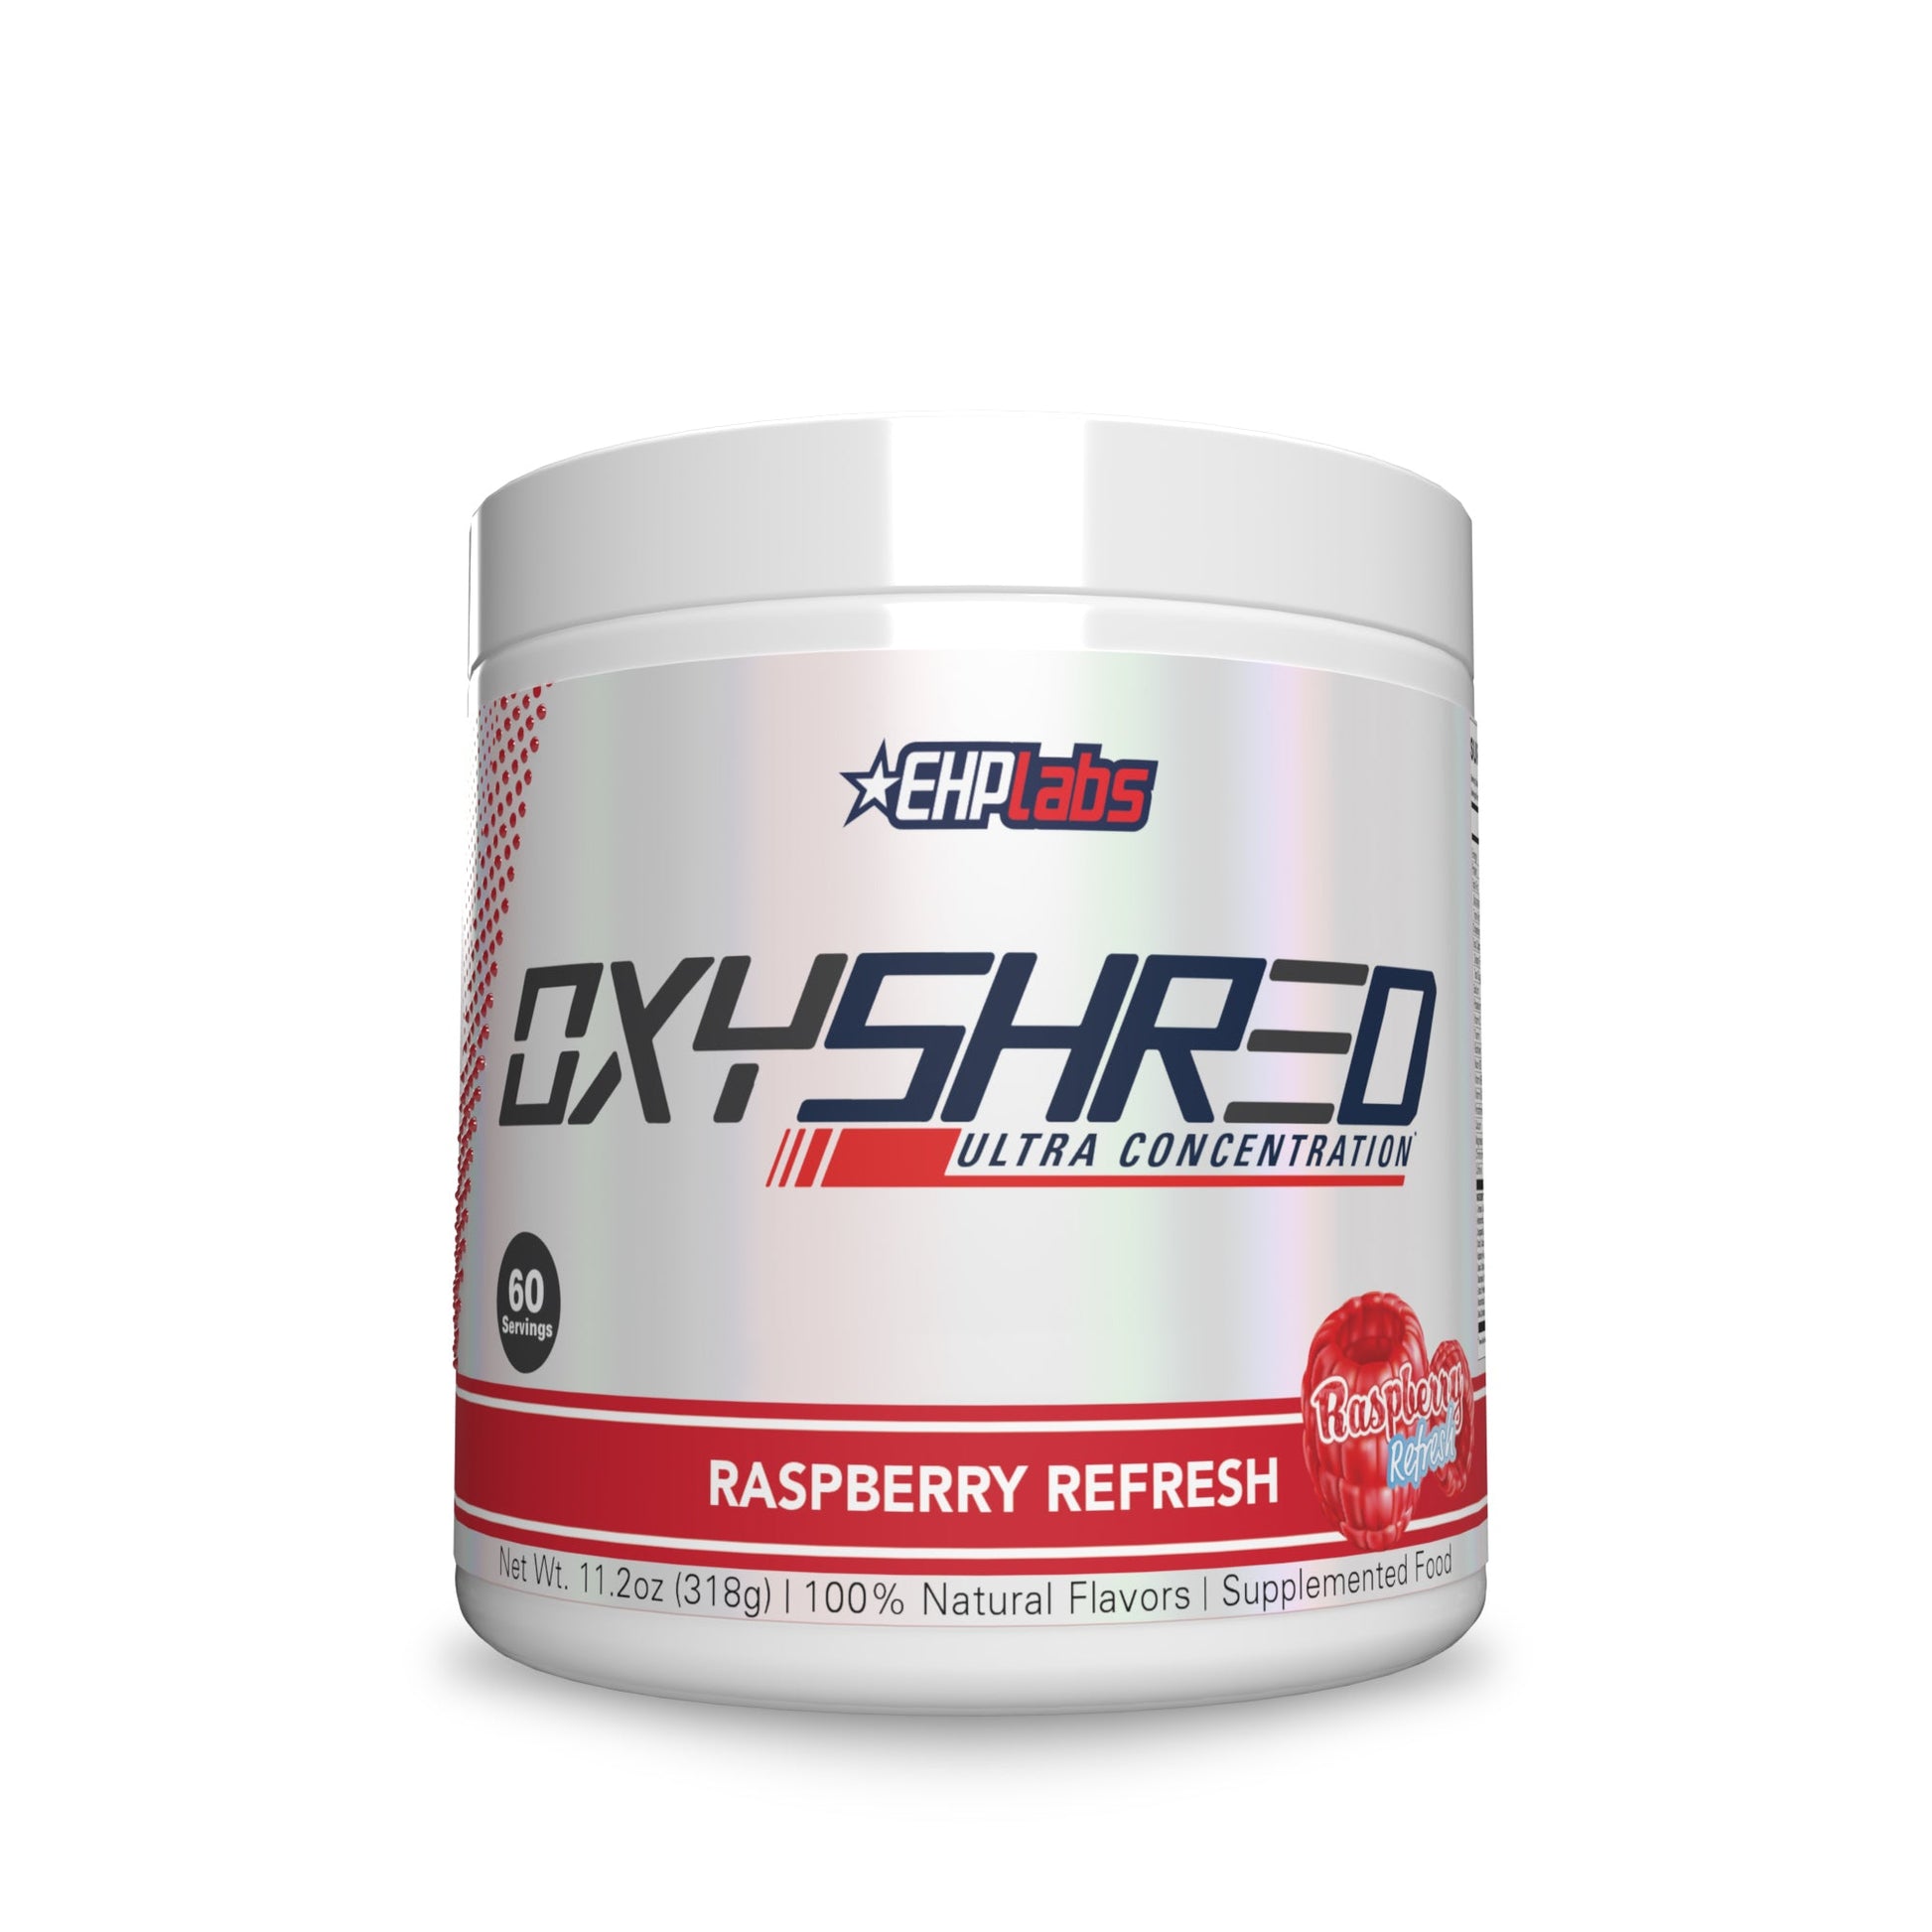 EHP Labs OxyShred Ultra Concentration 60 Serves - Supplements - Raspberry Refresh - The Cave Gym